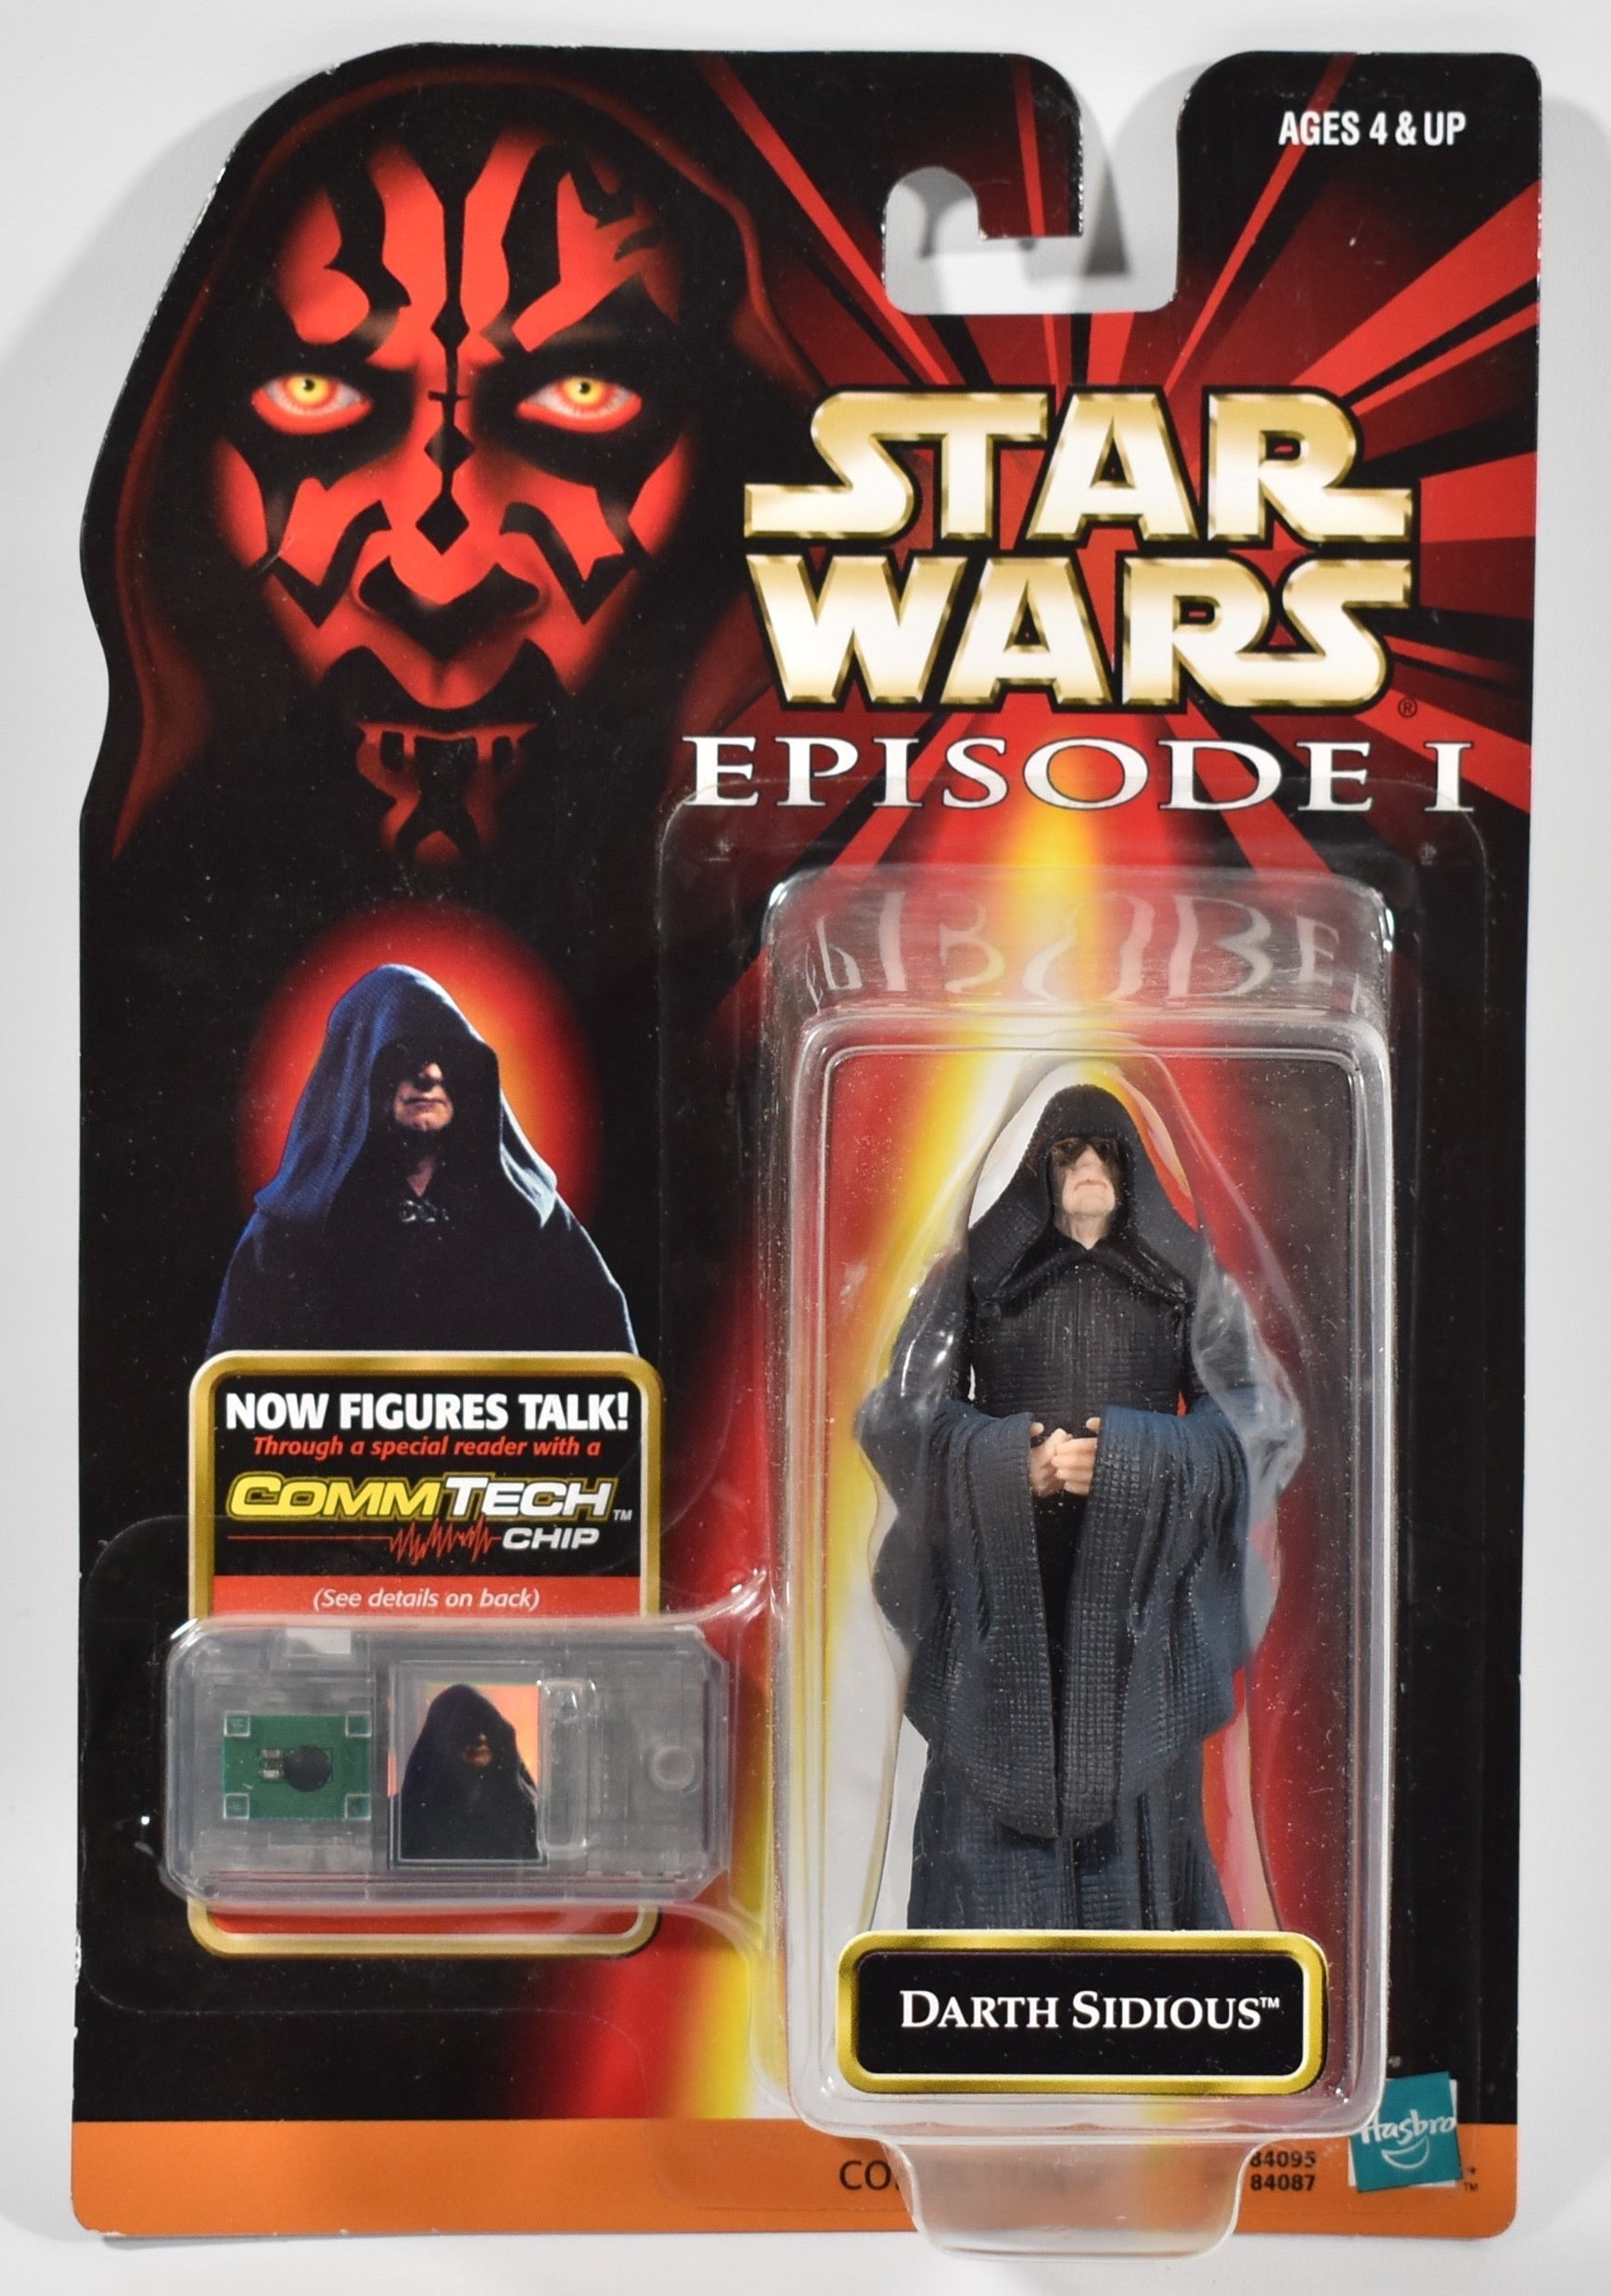 Star Wars Episode 1 Action Figure Darth Sidious